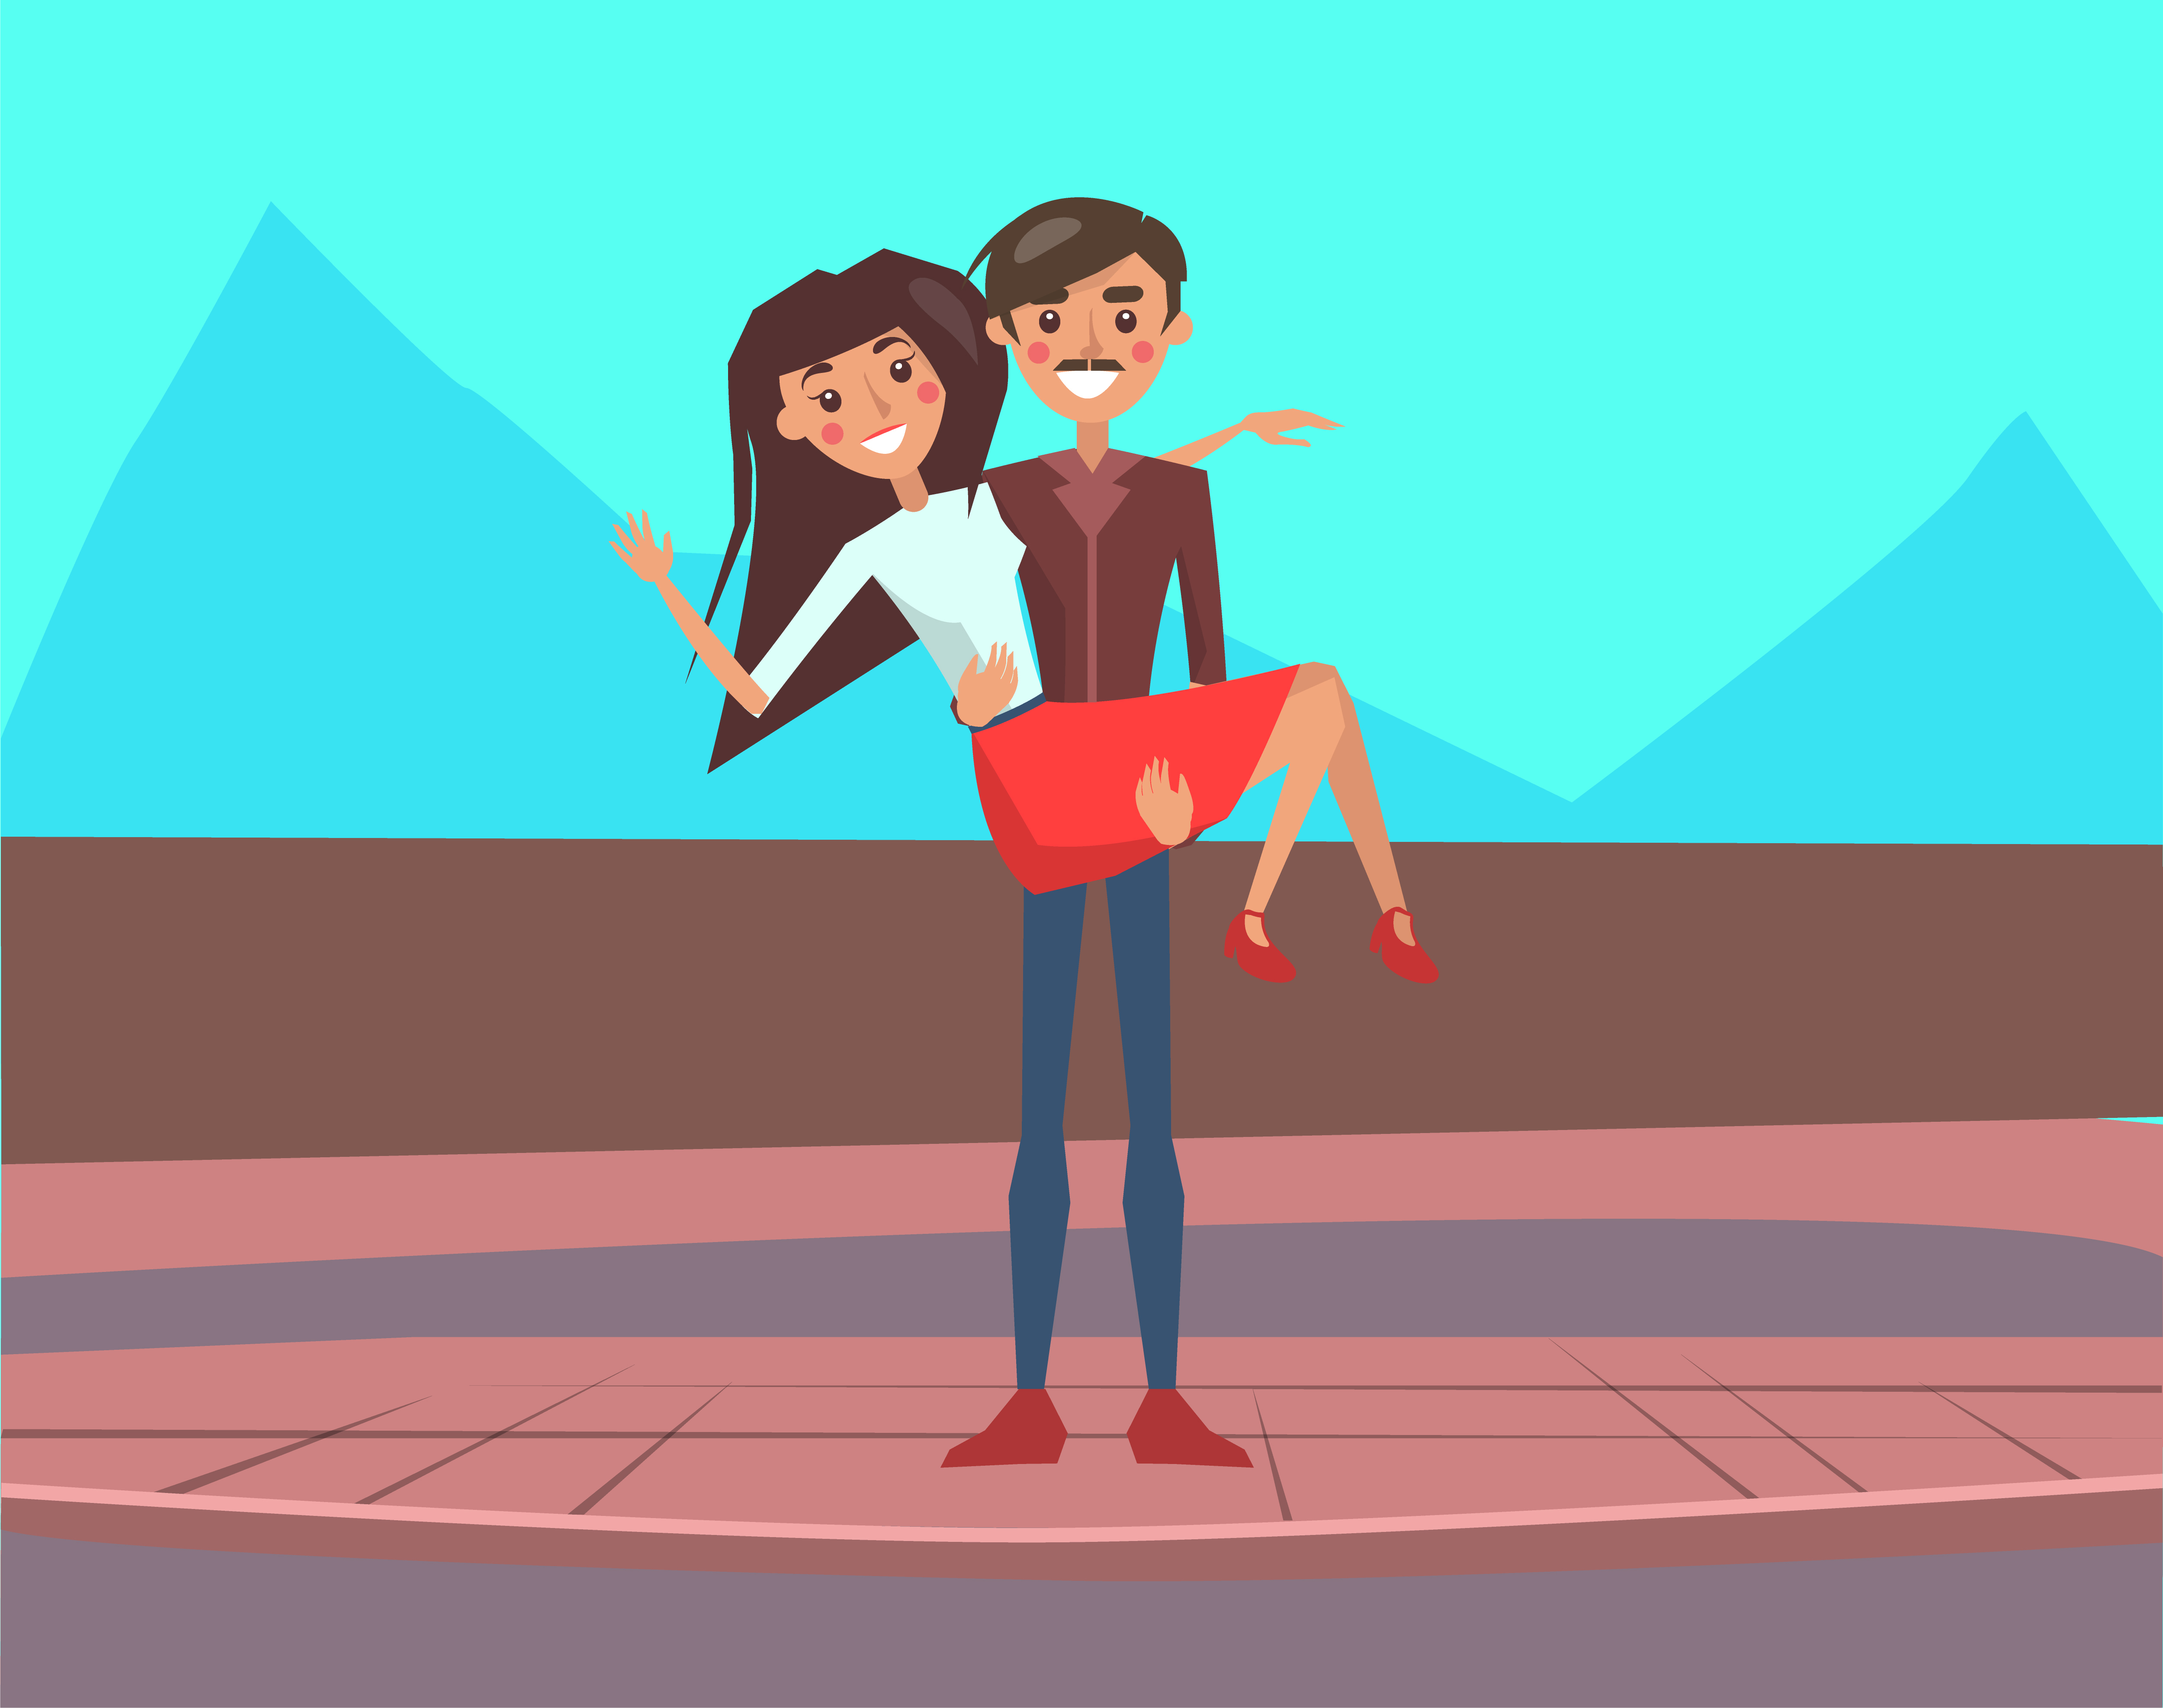 Couple of people in love. Man holding woman in his arms. Boyfriend carrying girlfriend in hands. Cheerful cartoon characters. Valentines Day vector. Man Holding Woman in his Hands, Couple in Love